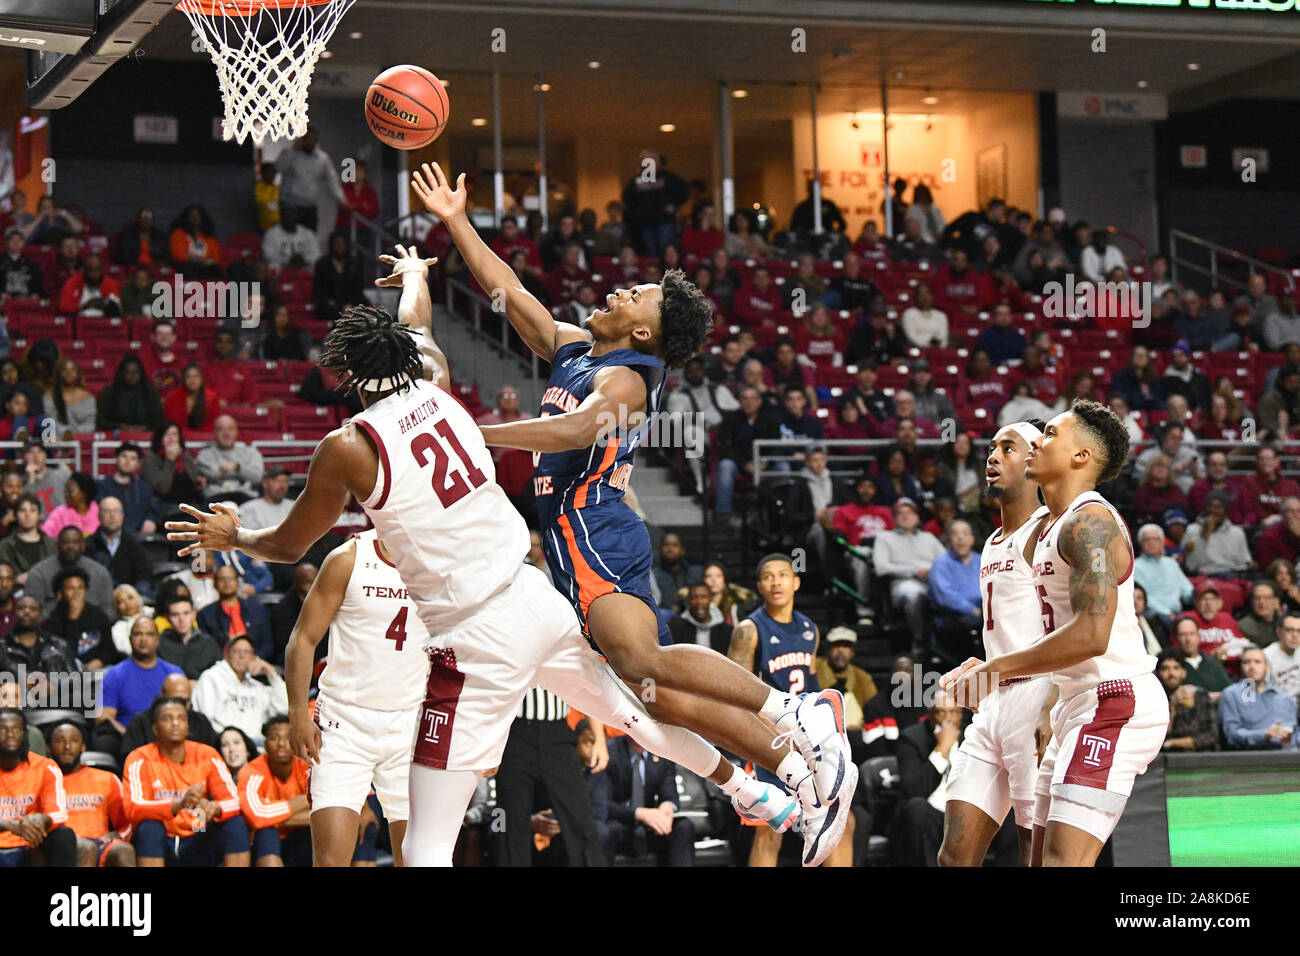 Philadelphia, Pennsylvania, USA. 9th Nov, 2019. Morgan State Bears guard SHERWYN DEVONISH-PRINCE JR (5) puts up a shot as Temple Owls forward JUSTYN HAMILTON (21) defends during the basketball game played at the Liacouras Center in Philadelphia. Temple beat Morgan State 75-57. Credit: Ken Inness/ZUMA Wire/Alamy Live News Stock Photo